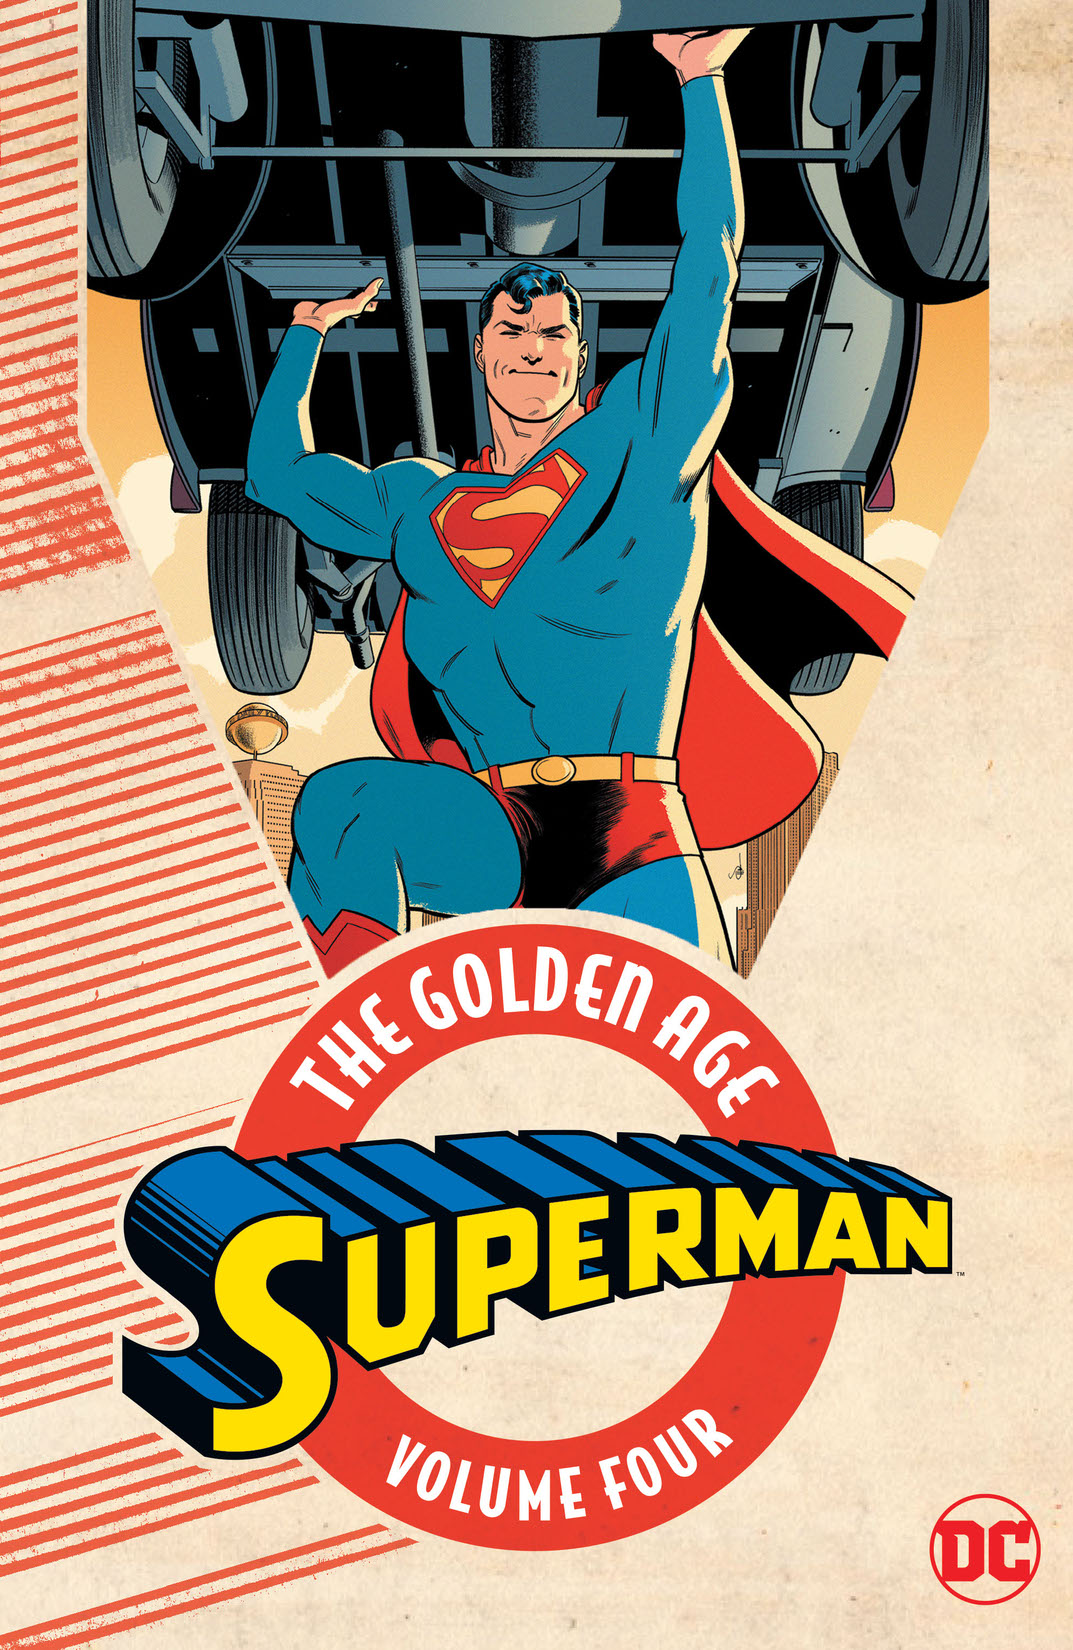 Superman: The Golden Age Vol. 4 preview images